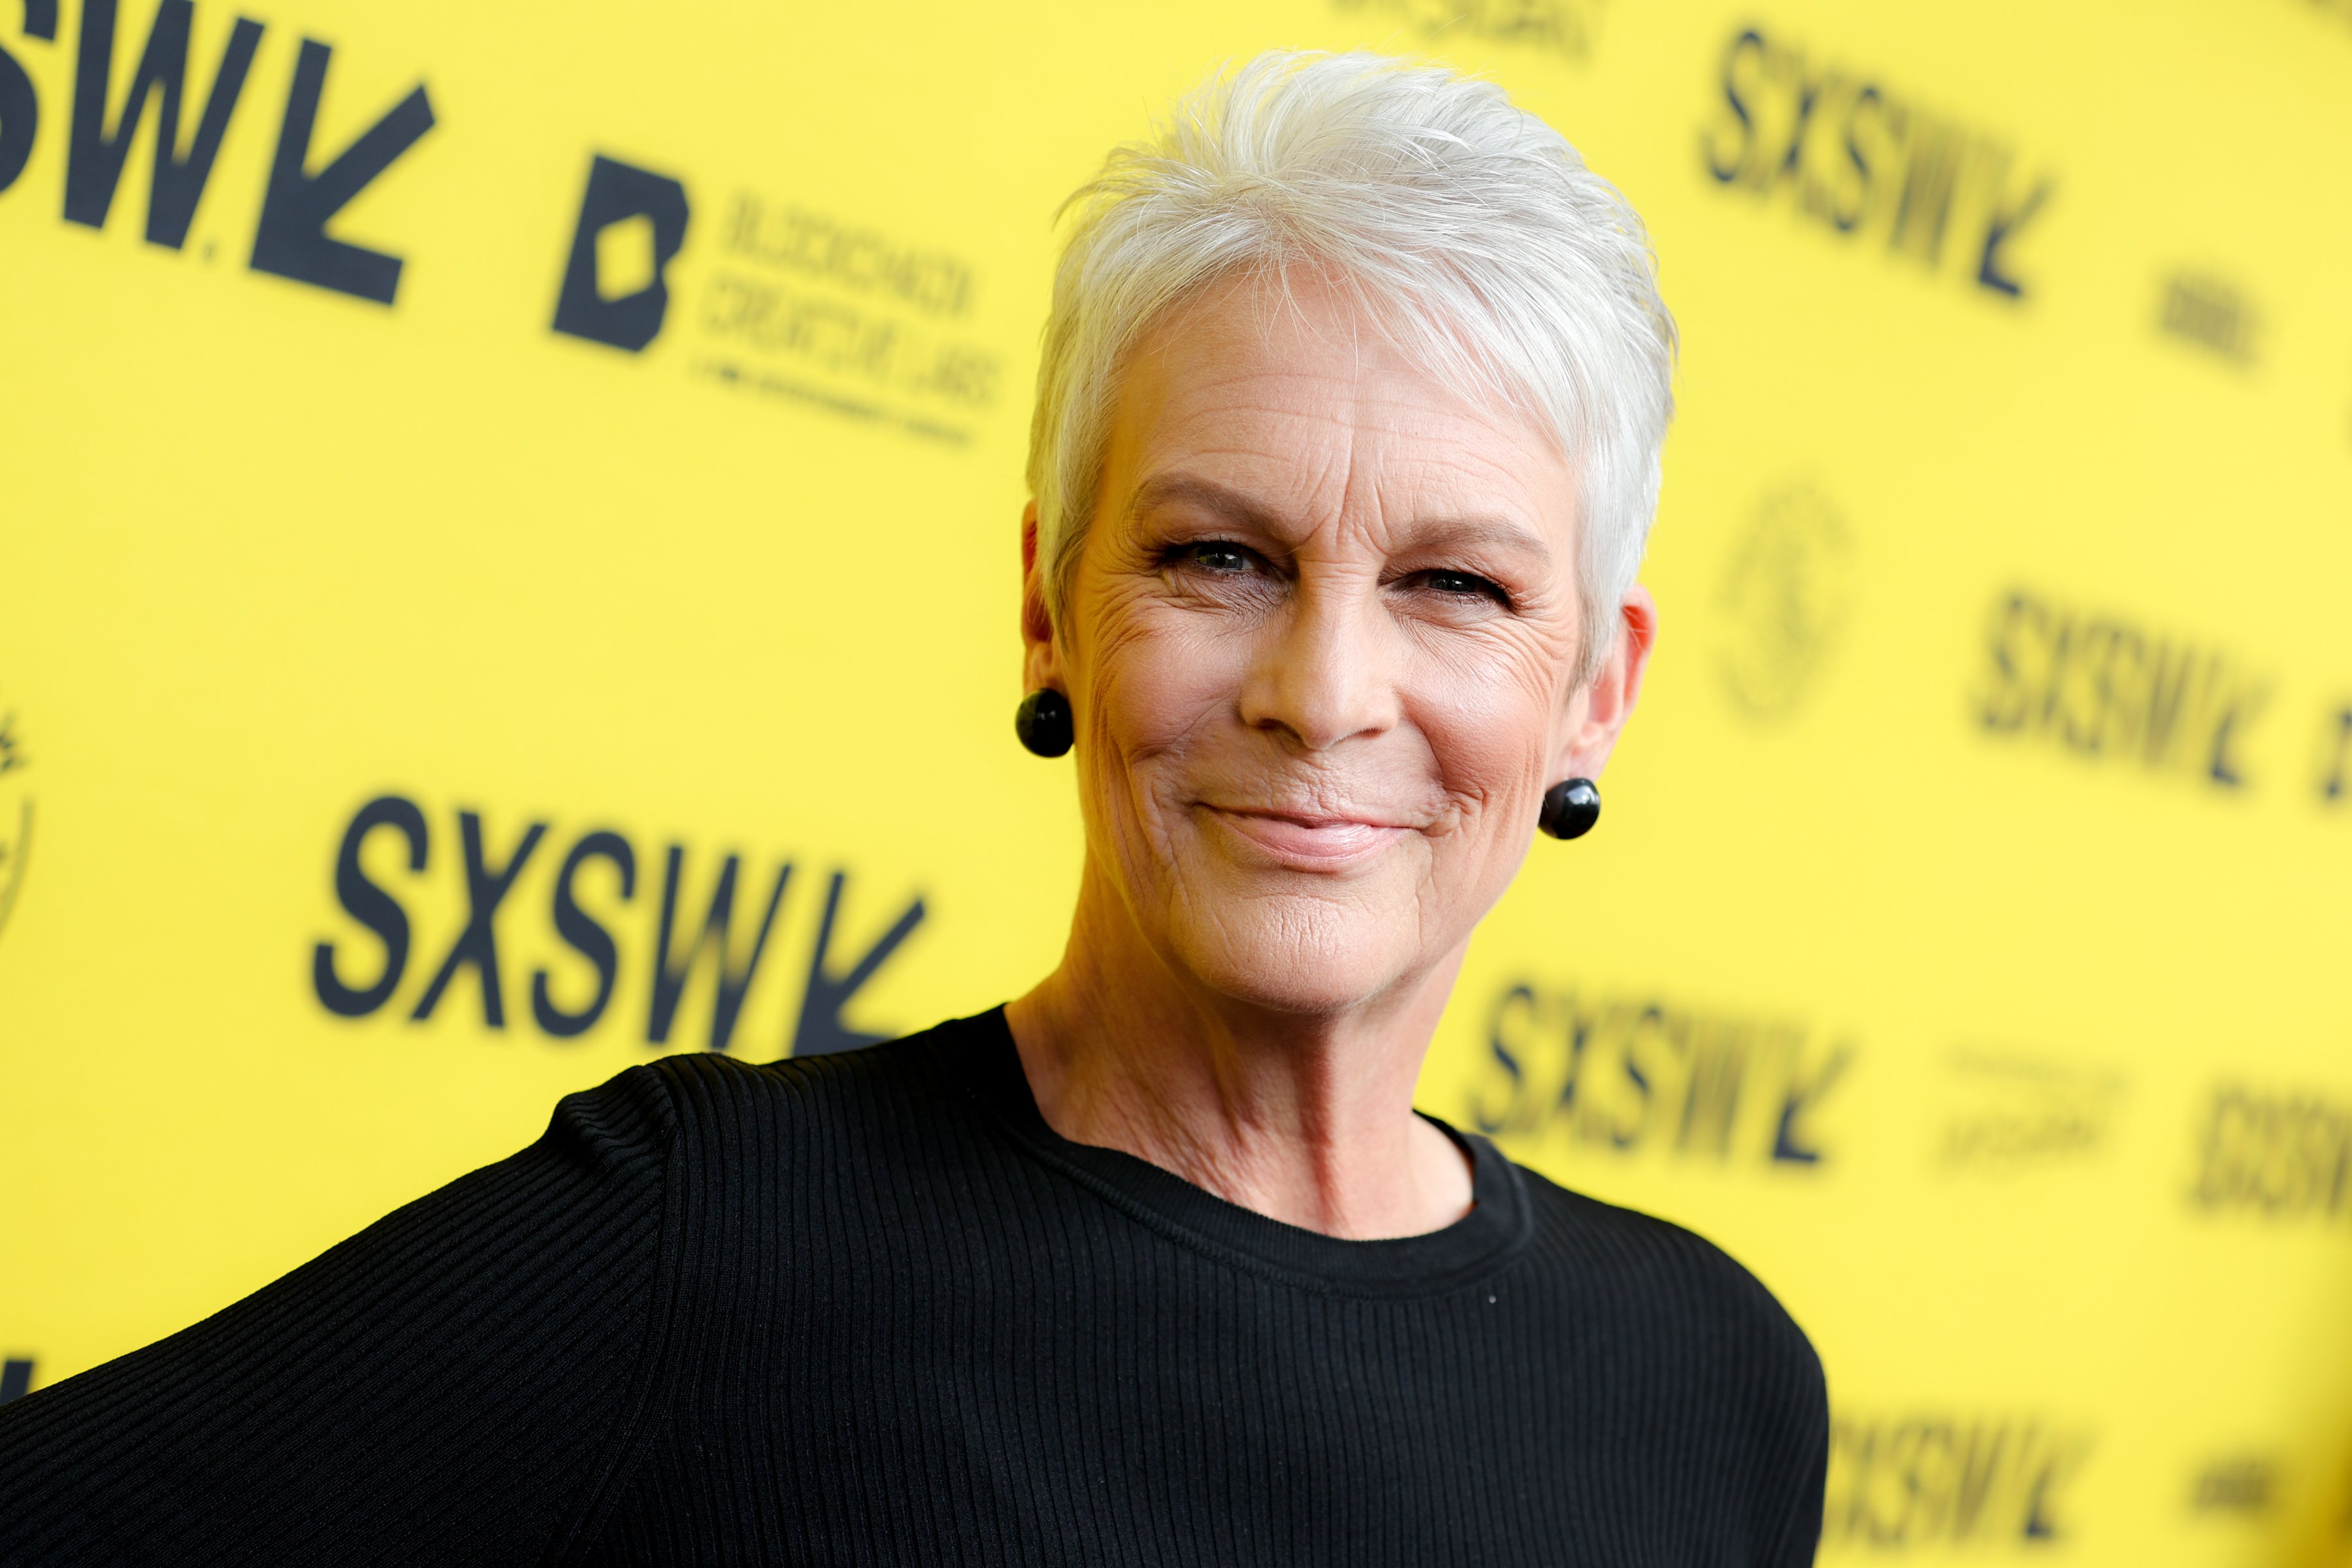 Jamie Lee Curtis at the opening night premiere of "Everything Everywhere All At Once" at The Paramount Theatre in Austin, Texas on March 11, 2022 | Source: Getty Images